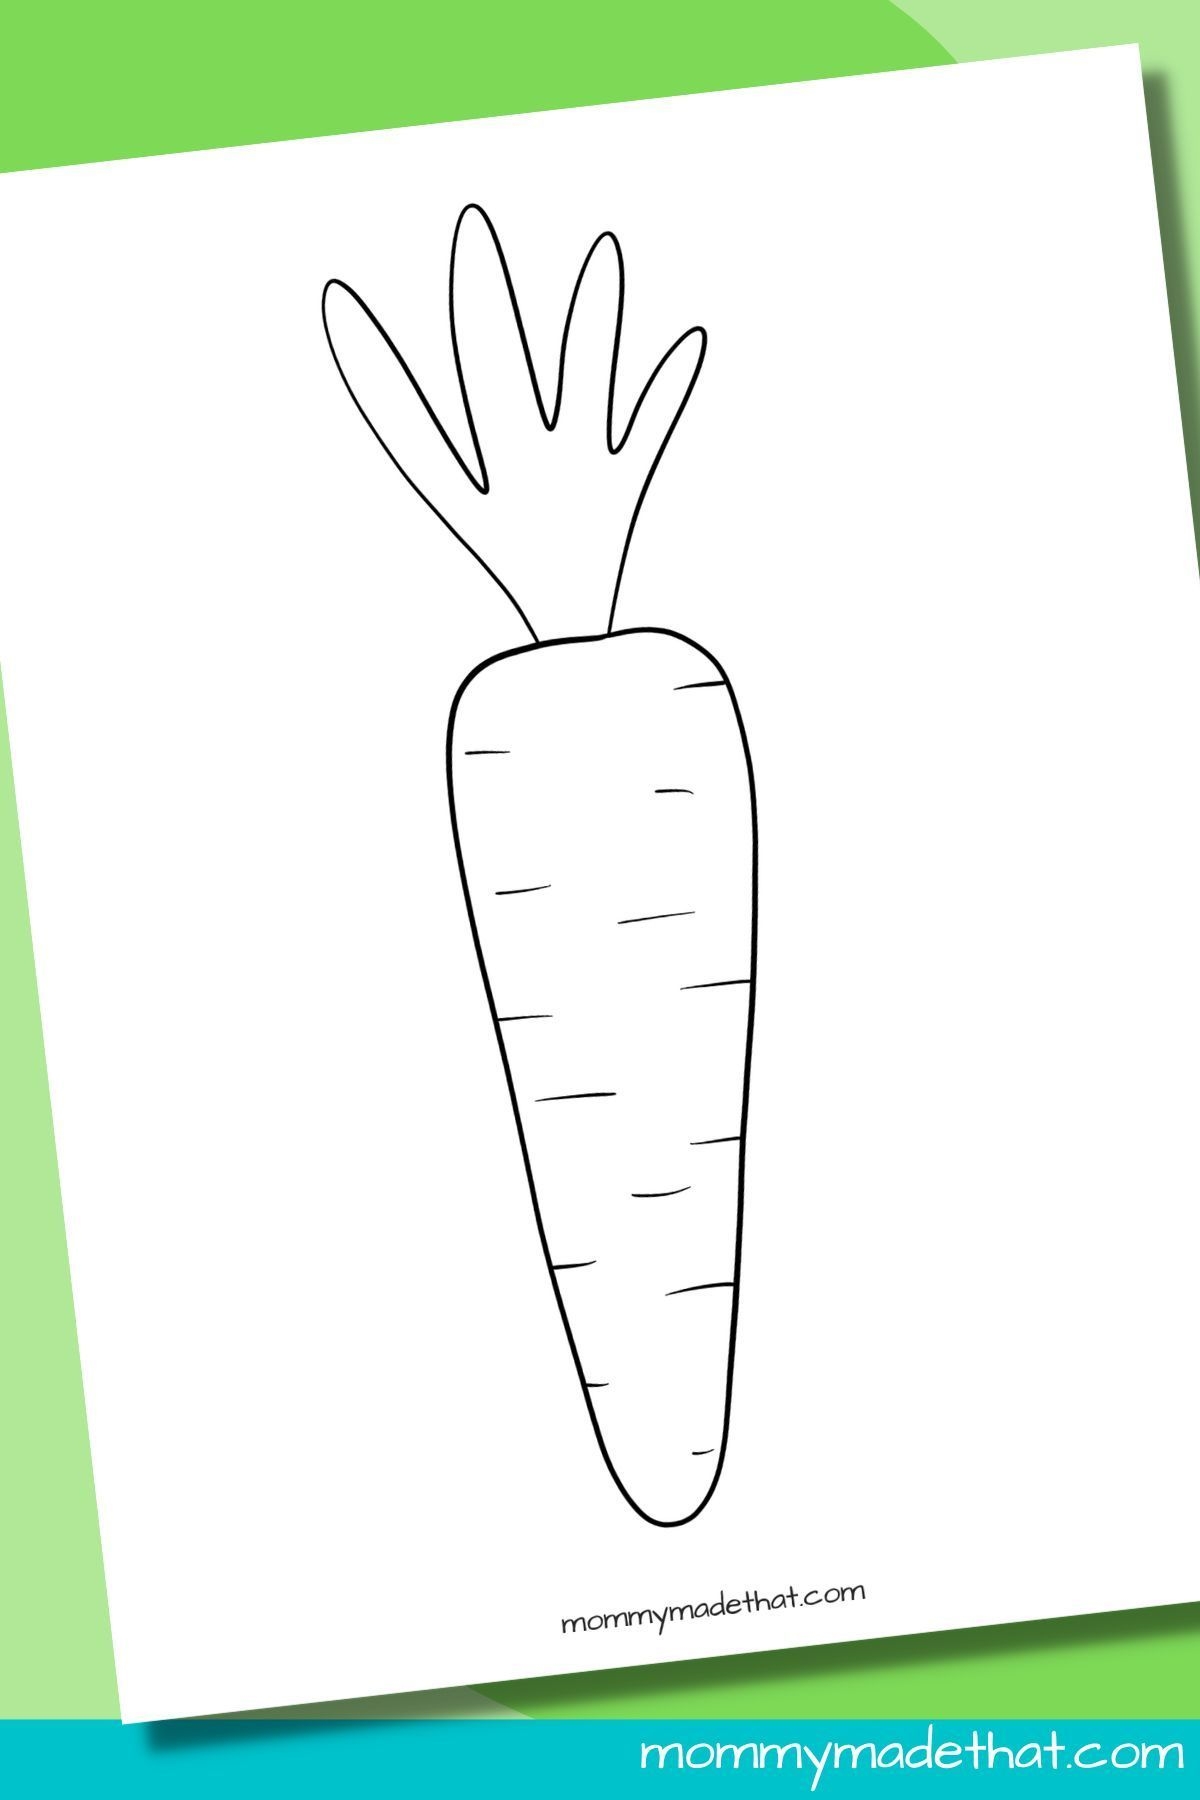 Free Printable Carrot Templates For Easter Crafts